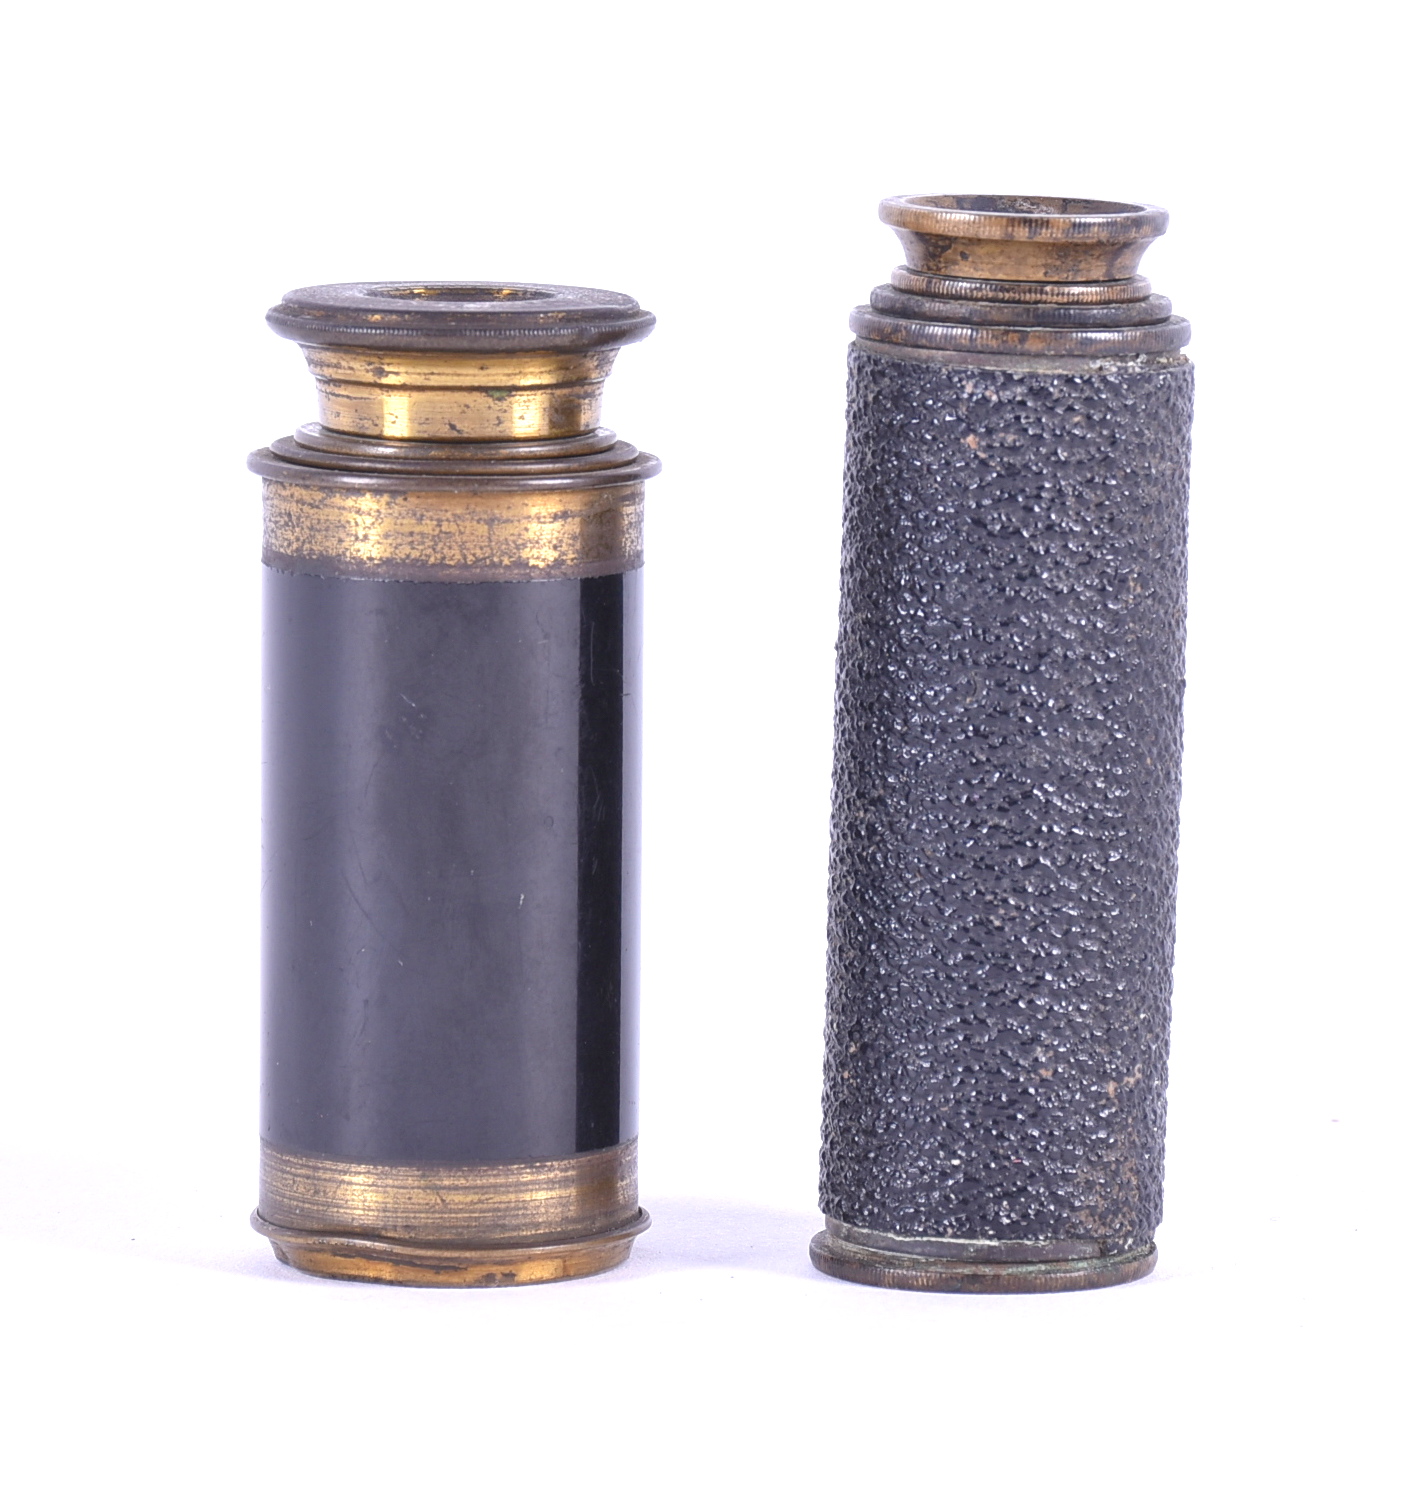 Two miniature brass telescopes each in four segments, lenses intact, one with textured body. - Image 6 of 6